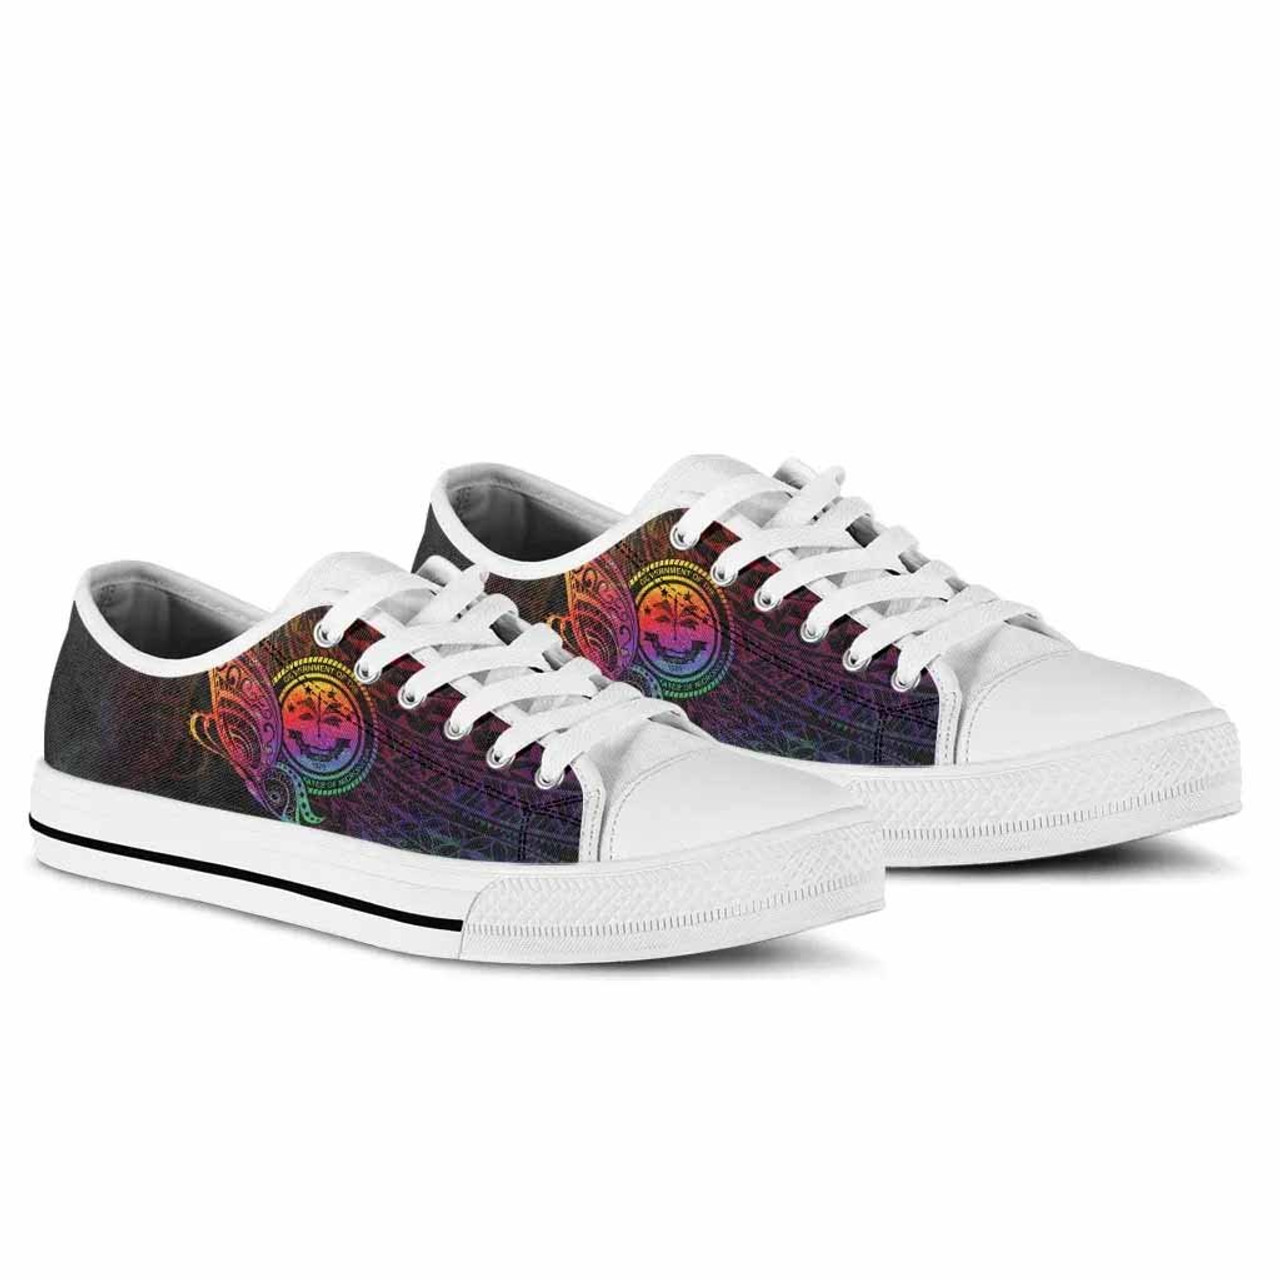 Federated States of Micronesia Low Top Shoes - Butterfly Polynesian Style 6